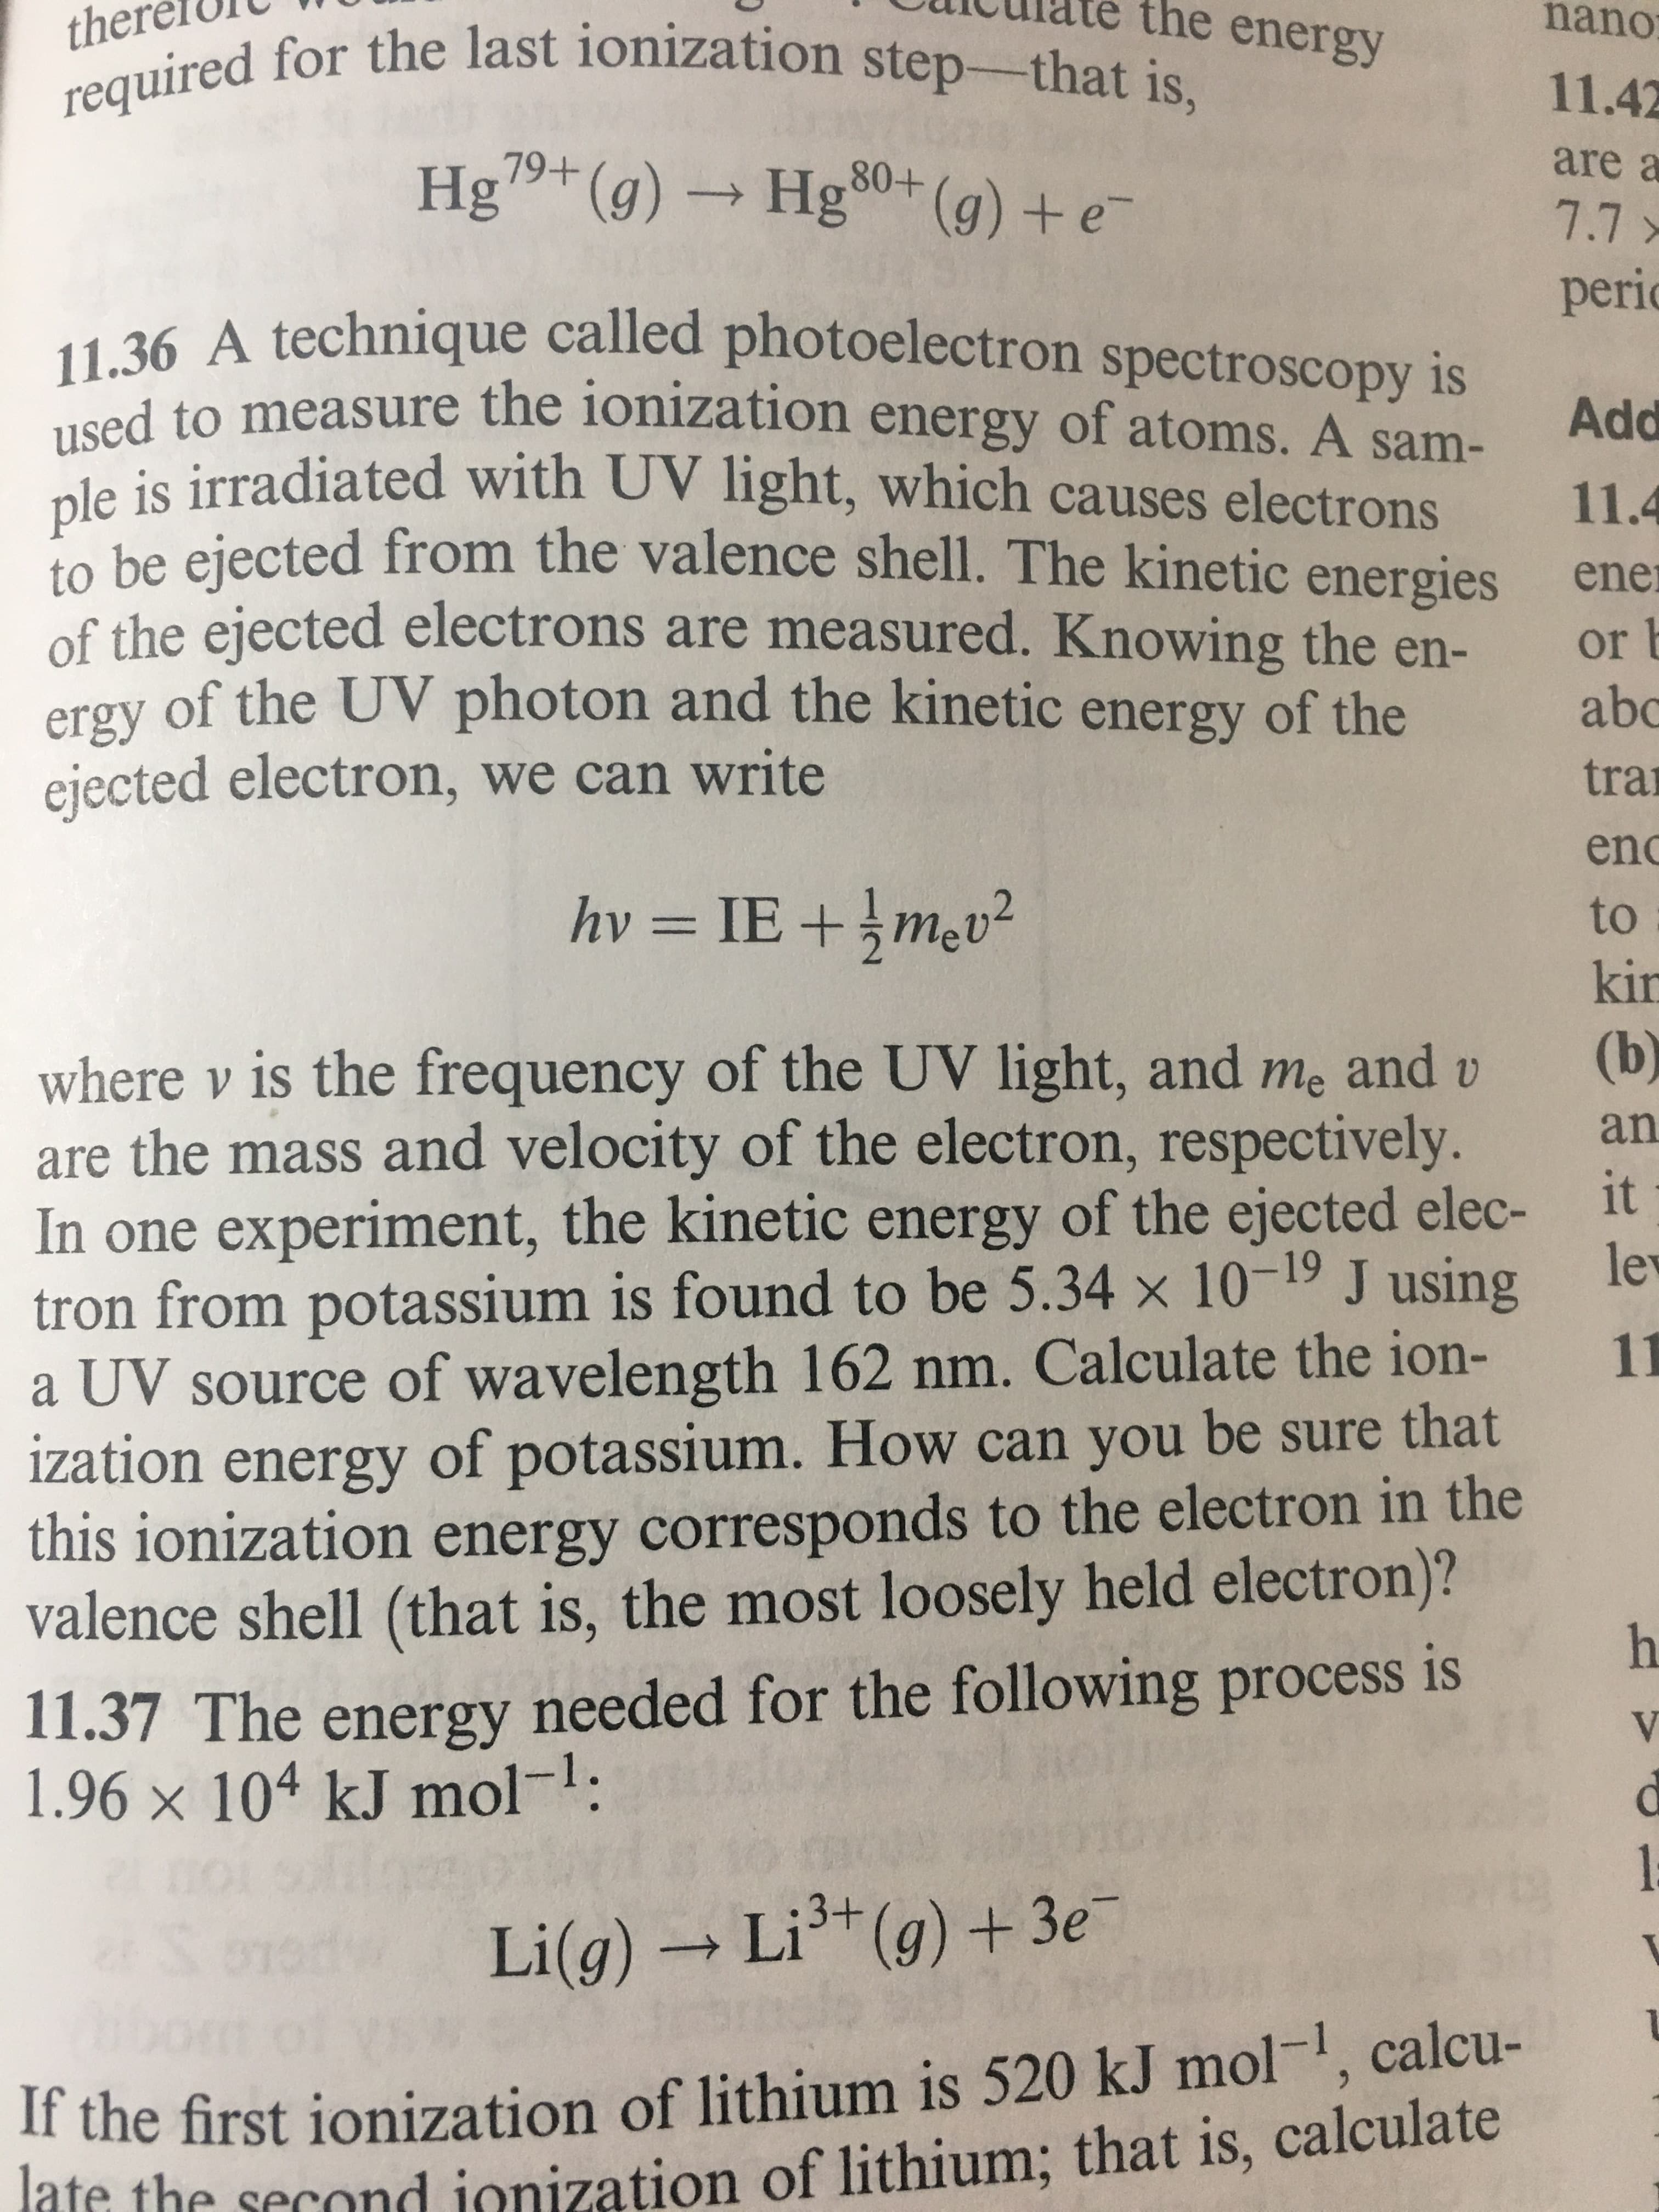 the energy
nano
ther
required for the last ionization step-that is,
11.42
are a
79+
Hg(g)Hg0(g)e
80+
7.7
peric
11.36 A technique called photoelectron spectroscopy is
used to measure the ionization energy of atoms. A sam-
ple is irradiated with UV light, which causes electrons
Add
11.4
be eiected from the valence shell. The kinetic energies
of the ejected electrons are measured. Knowing the en-
ergy of the UV photon and the kinetic energy of the
ejected electron, we can write
ener
or
abc
tra
enc
hv -ΙE +5mv
to
kir
(b)
where v is the frequency of the UV light, and me and v
are the mass and velocity of the electron, respectively.
In one experiment, the kinetic energy of the ejected elec-
an
it
lew
tron from potassium is found to be 5.34 x 10-19 J using
11
a UV source of wavelength 162 nm. Calculate the ion-
ization energy of potassium. How can you be sure that
this ionization energy corresponds to the electron in the
valence shell (that is, the most loosely held electron)?
h
11.37 The energy needed for the following process is
1.96 x 104 kJ mol:
V
1
Li(g)Li (g)+3e
If the first ionization of lithium is 520 kJ mol1, calcu-
late the second ionization of lithium; that is, calculate
